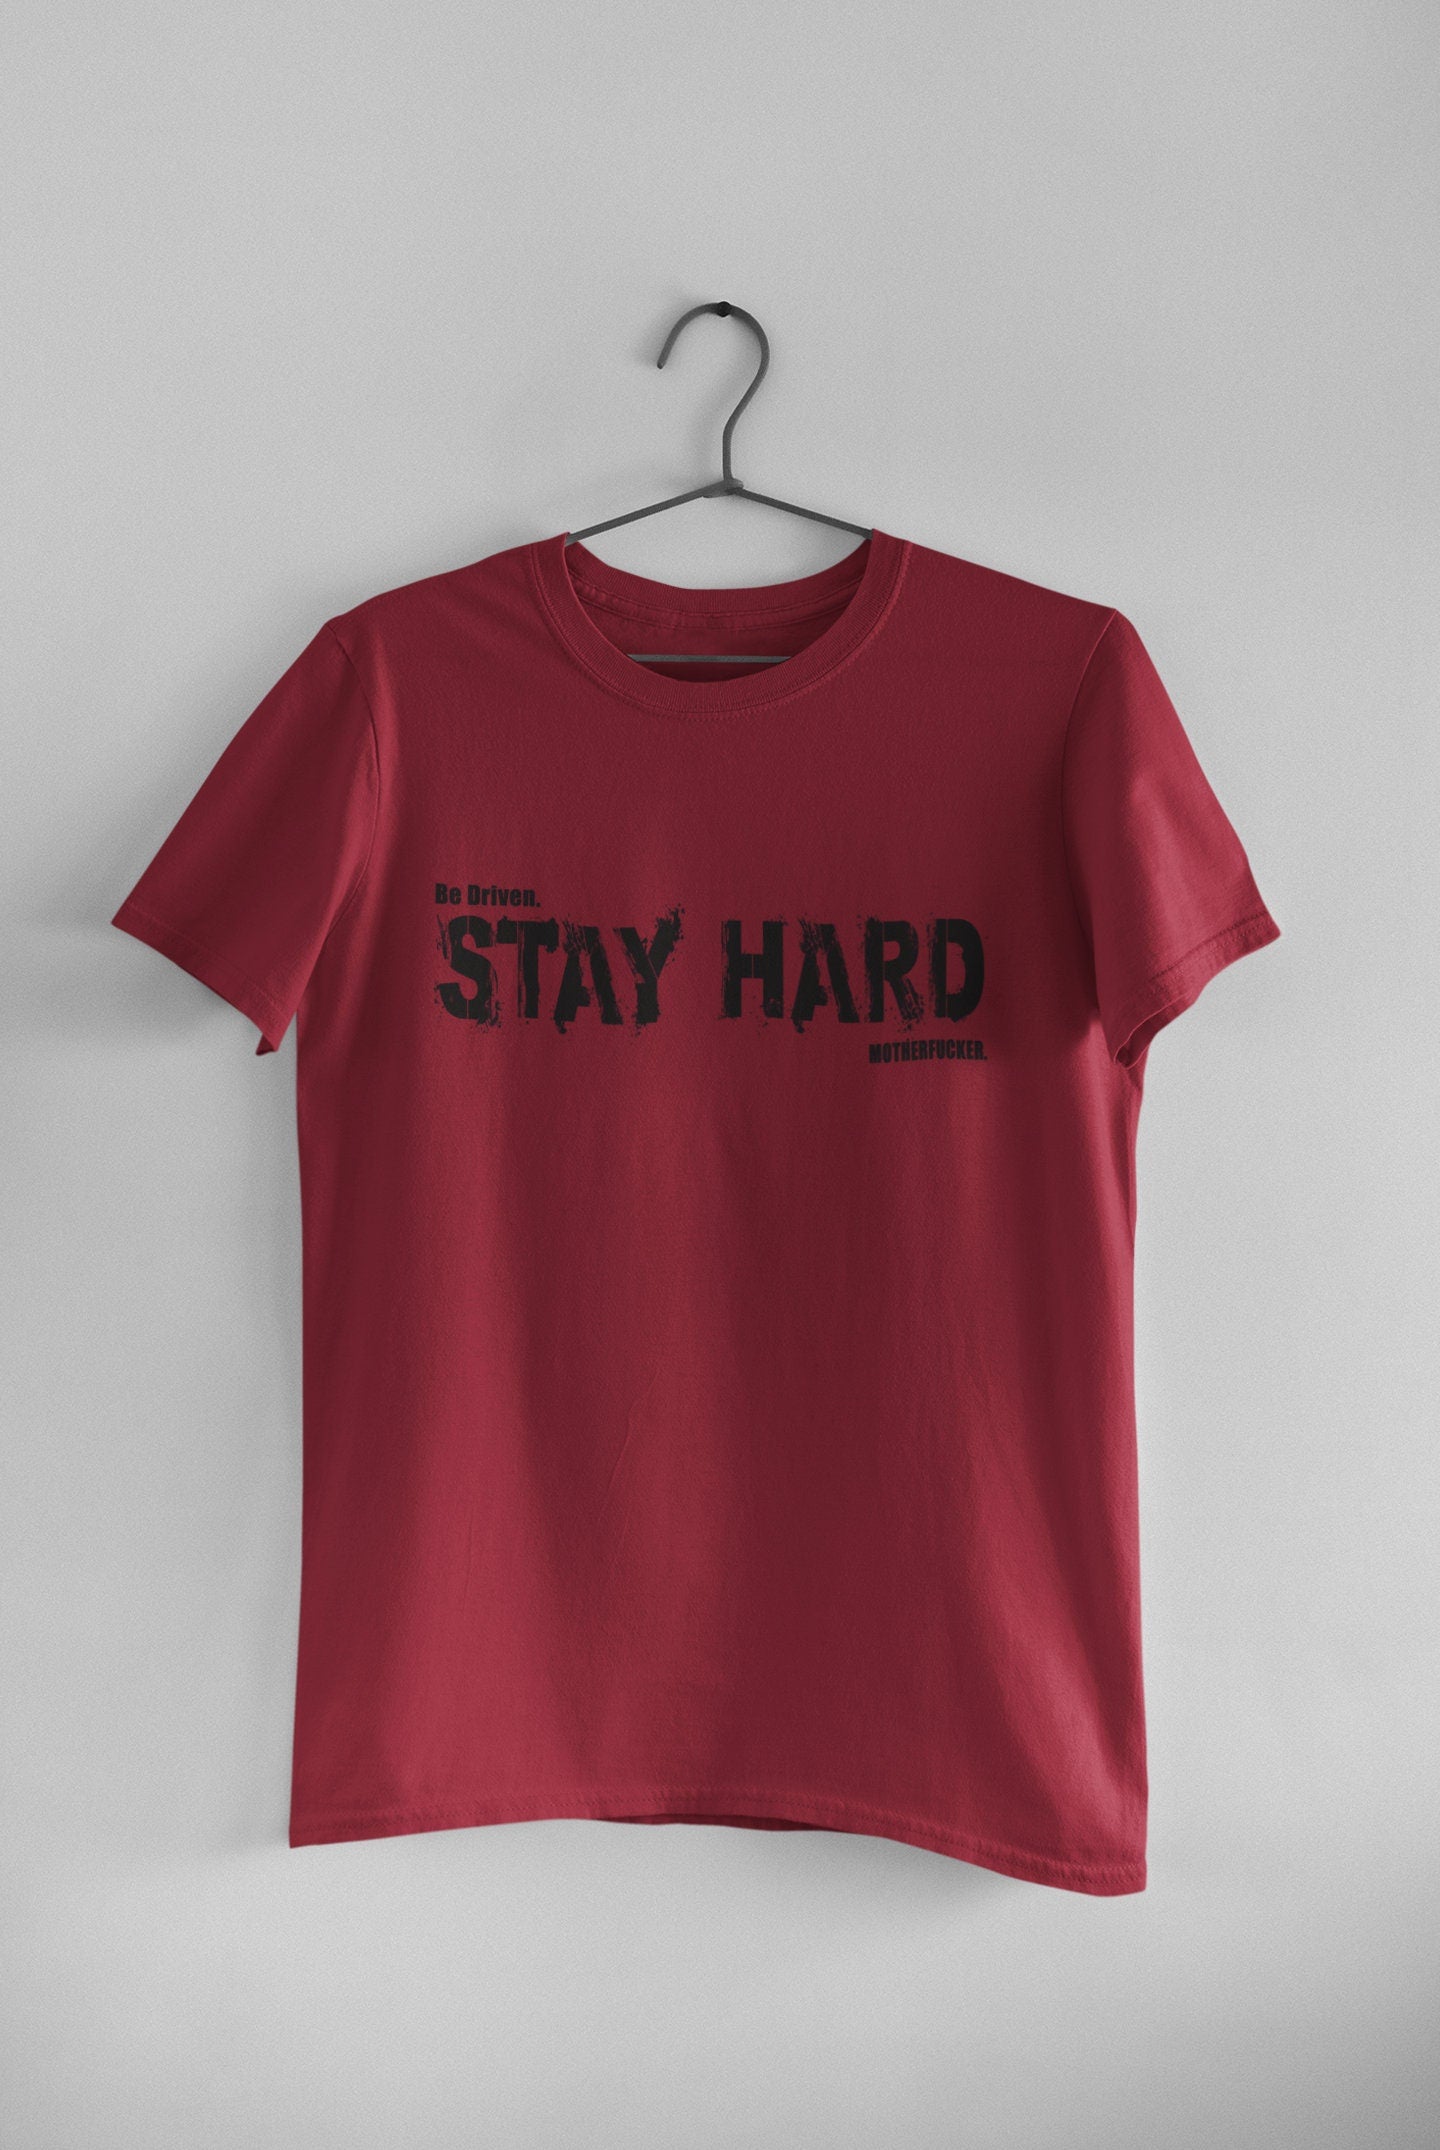 Be Driven. STAY HARD Motherfucker. Navy Seal TMF inspired graphic Ring Spun Cotton T Shirt and Tank Tops